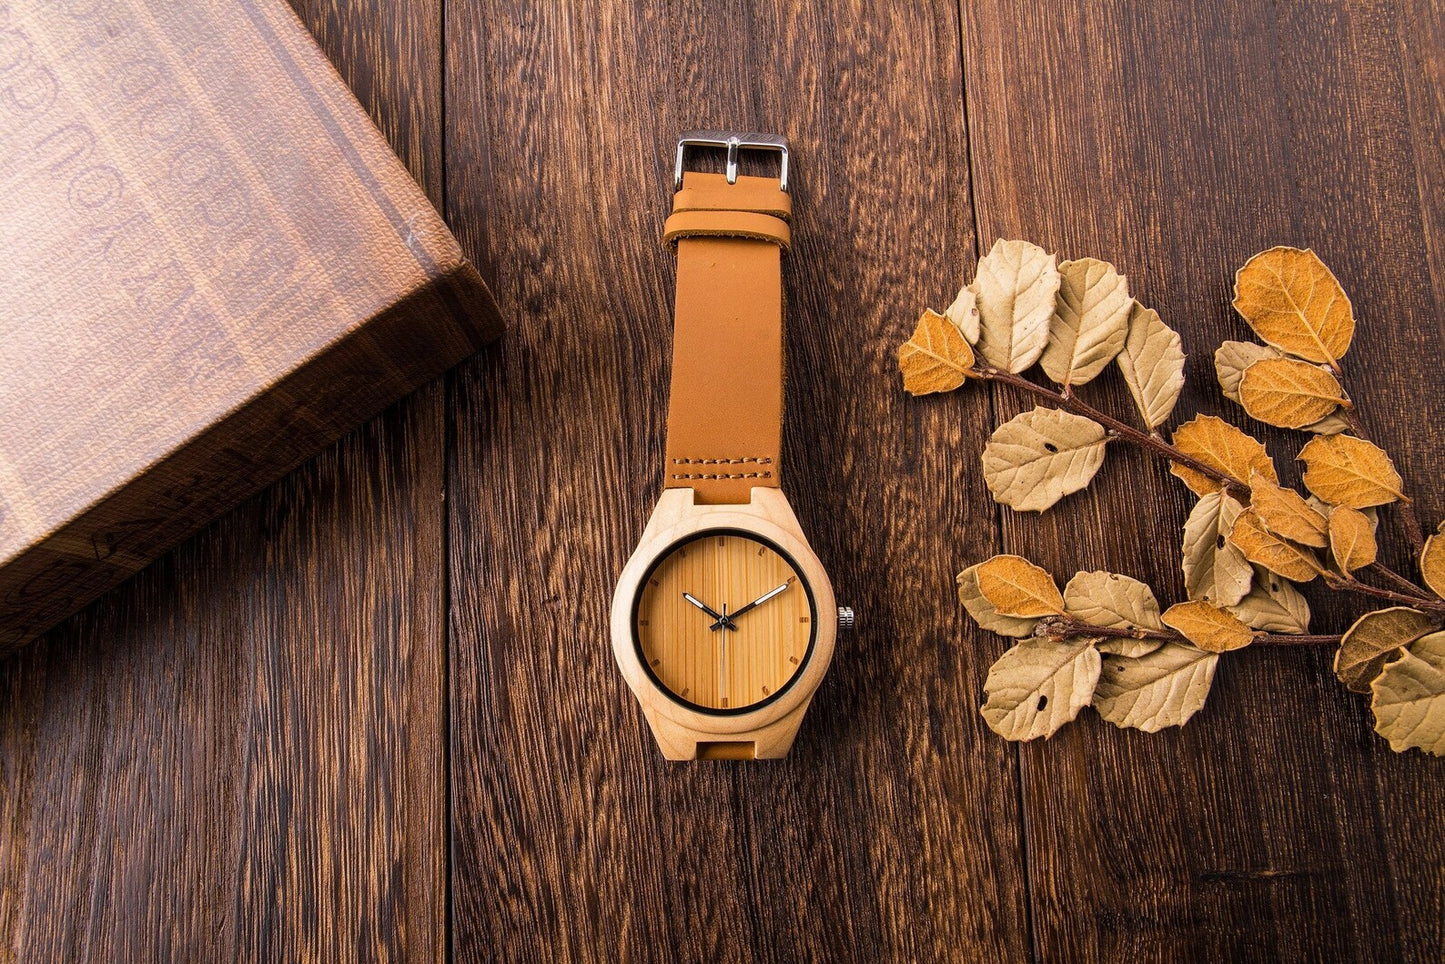 Wood Watch for Men and Women, Personalized Watch with Engraving Walnut Unisex Wood Watch, Anniversary Birthday Gift for Husband Wife